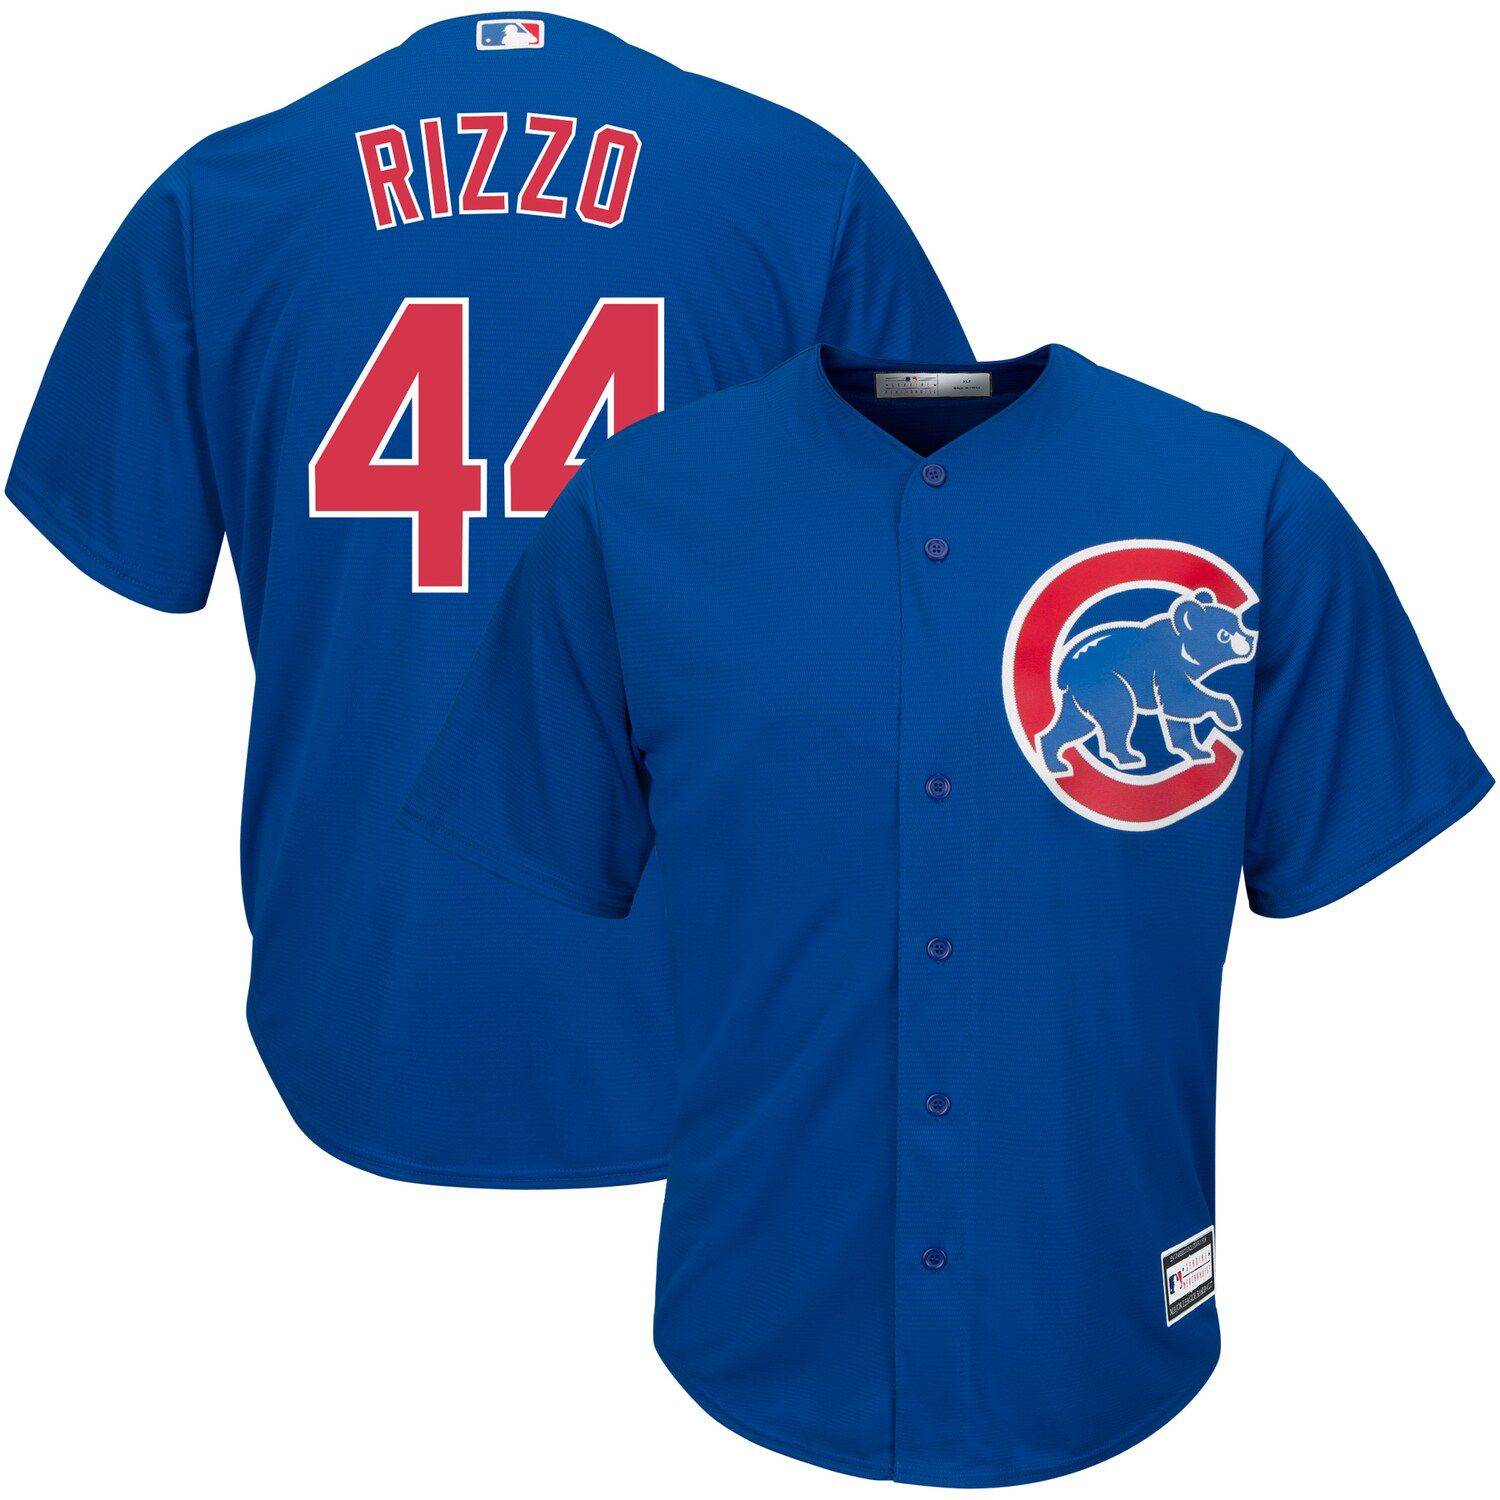 signed rizzo jersey